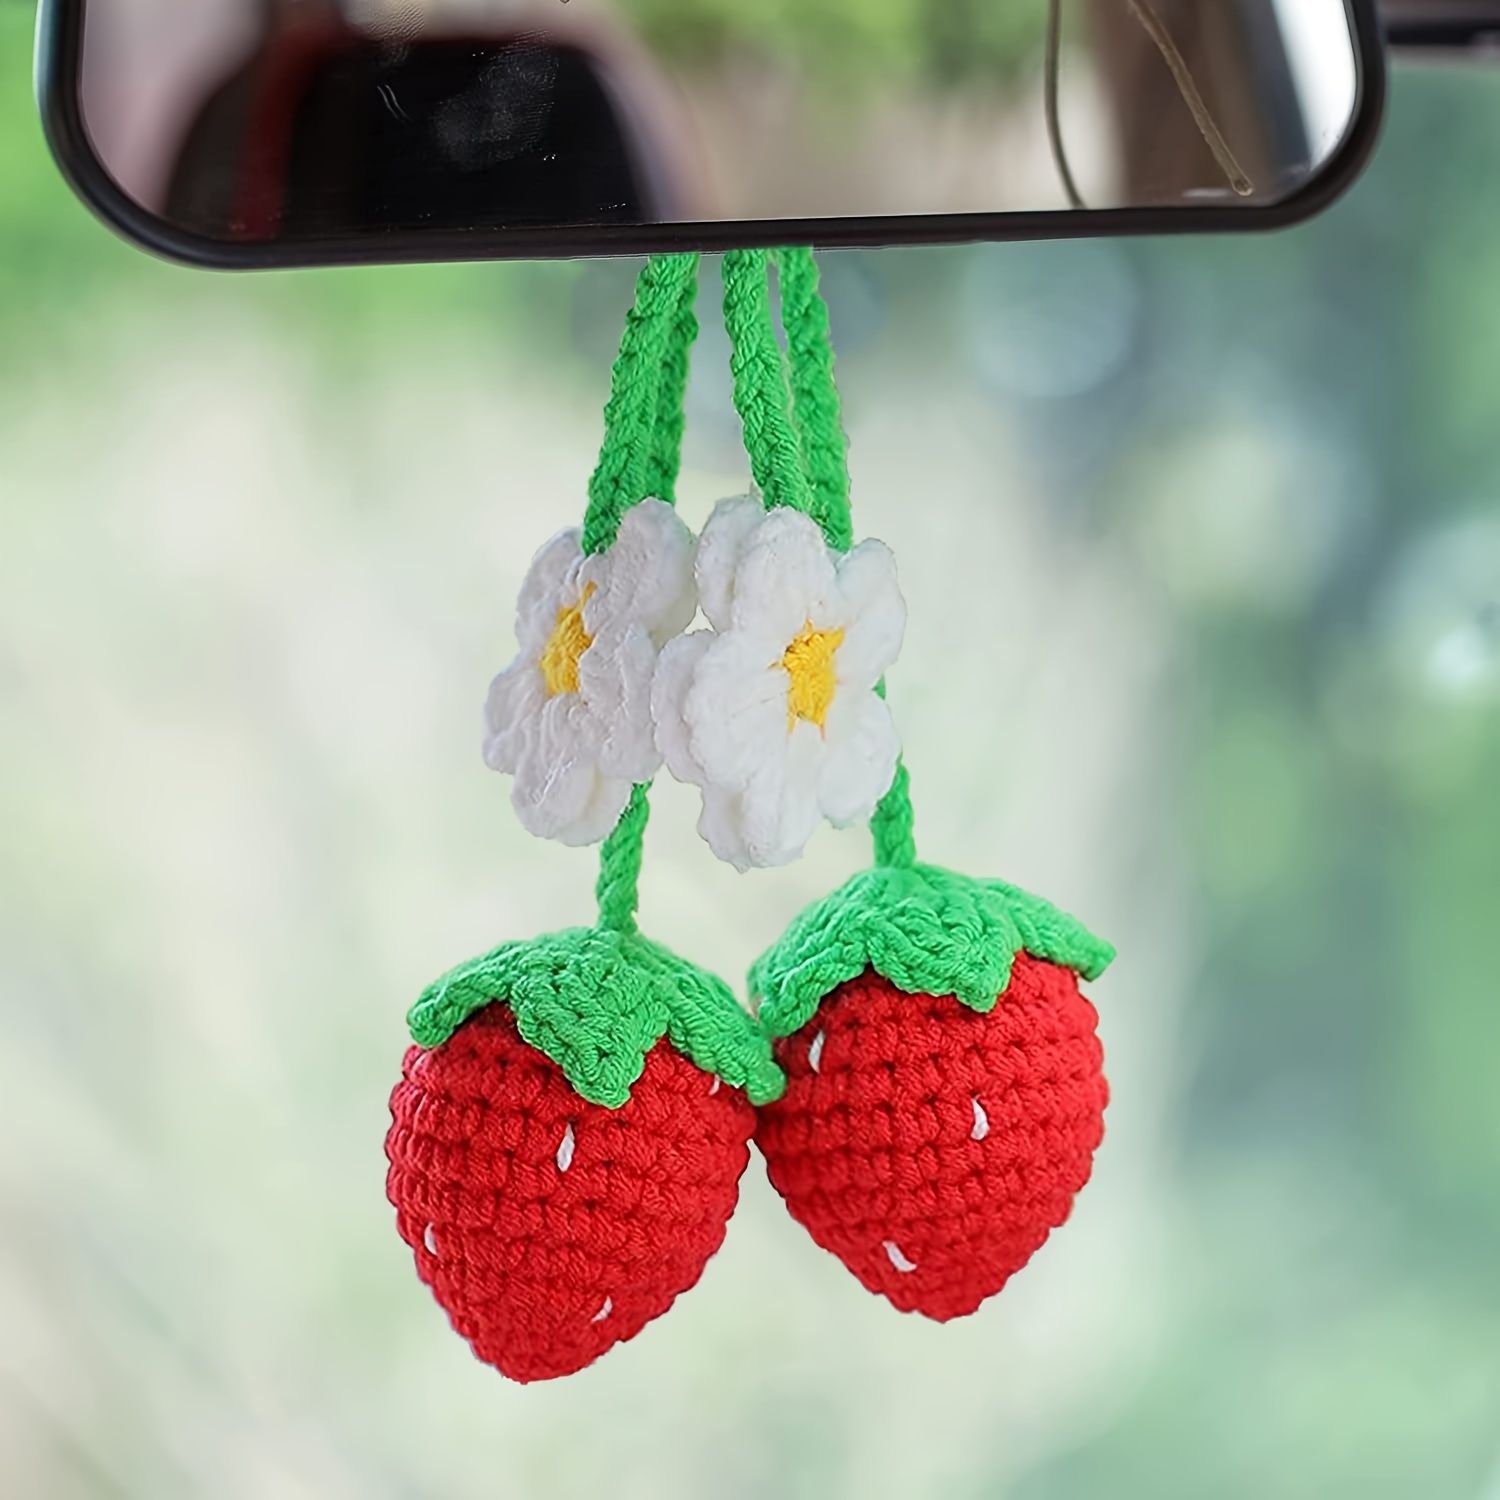 Rear View Mirror Accessories Crochet Swinging Couple Octopus Car Decor  Hanging Ornaments Cute Car Accessories for Women or Teens Car Pendant Car